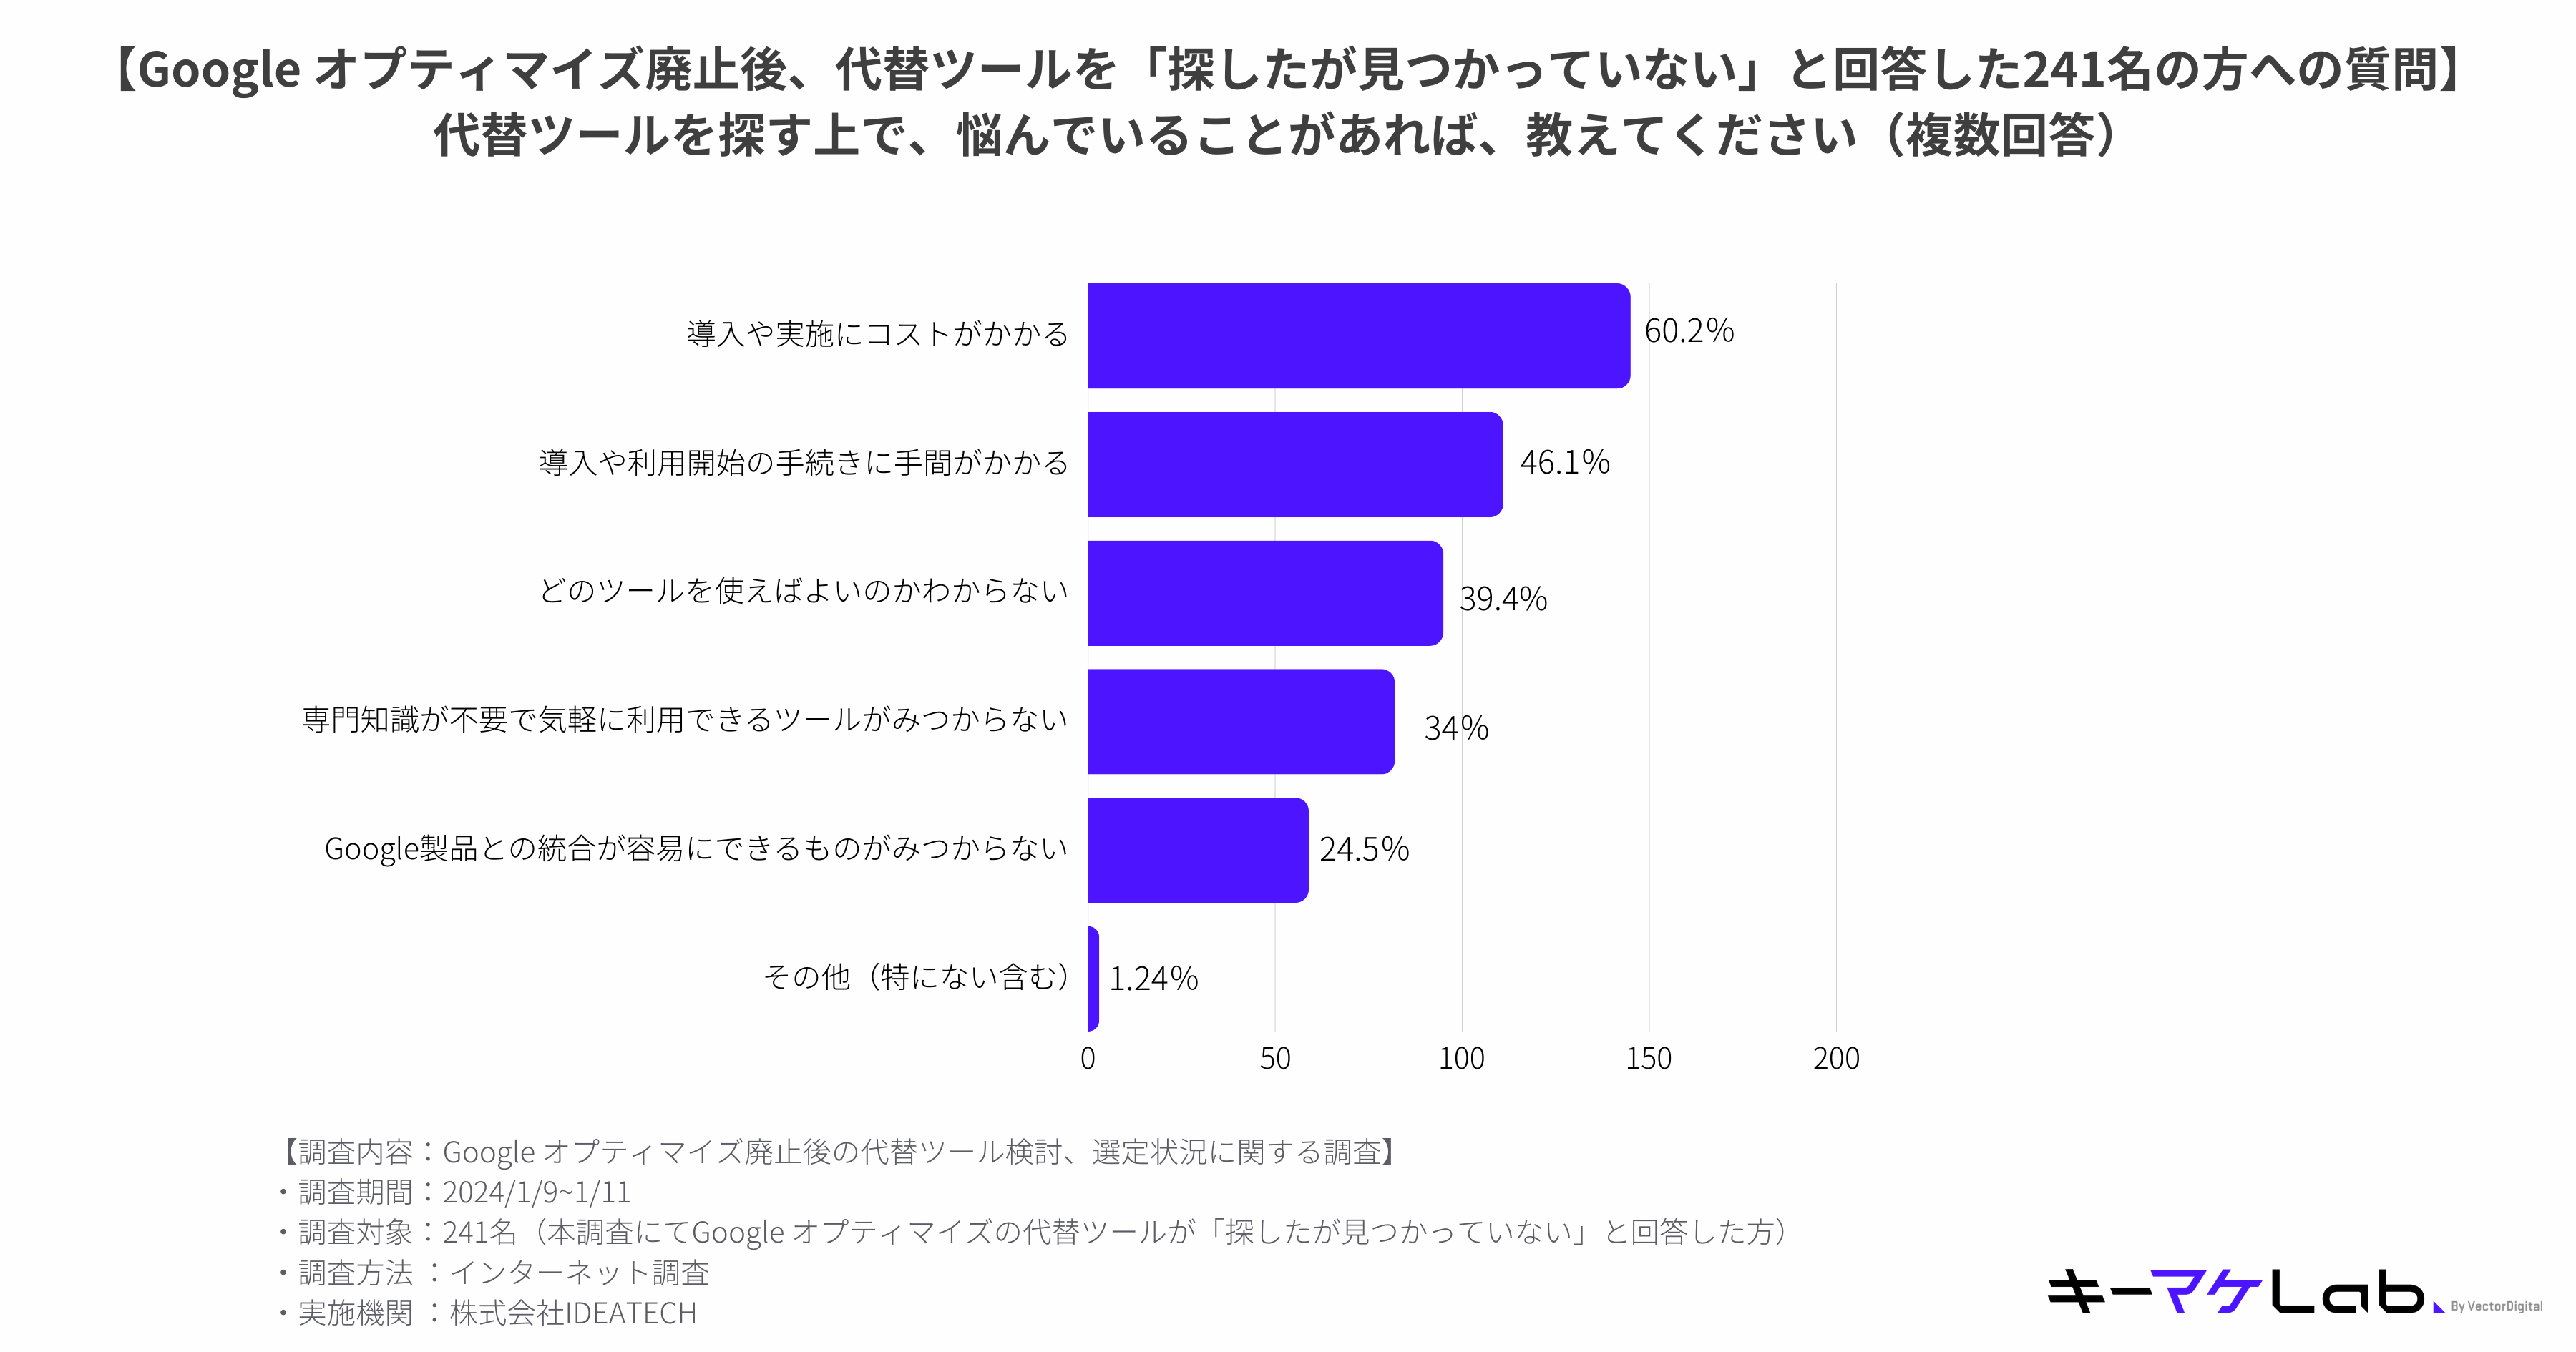 When asked about the concerns they have when looking for alternative tools, 60.2% said ``It's costly to introduce and implement.'' The runner-up was ``It takes a lot of time to install and start using it,'' at 46.1%, and 39.4% said ``I don't know which tool to use.''